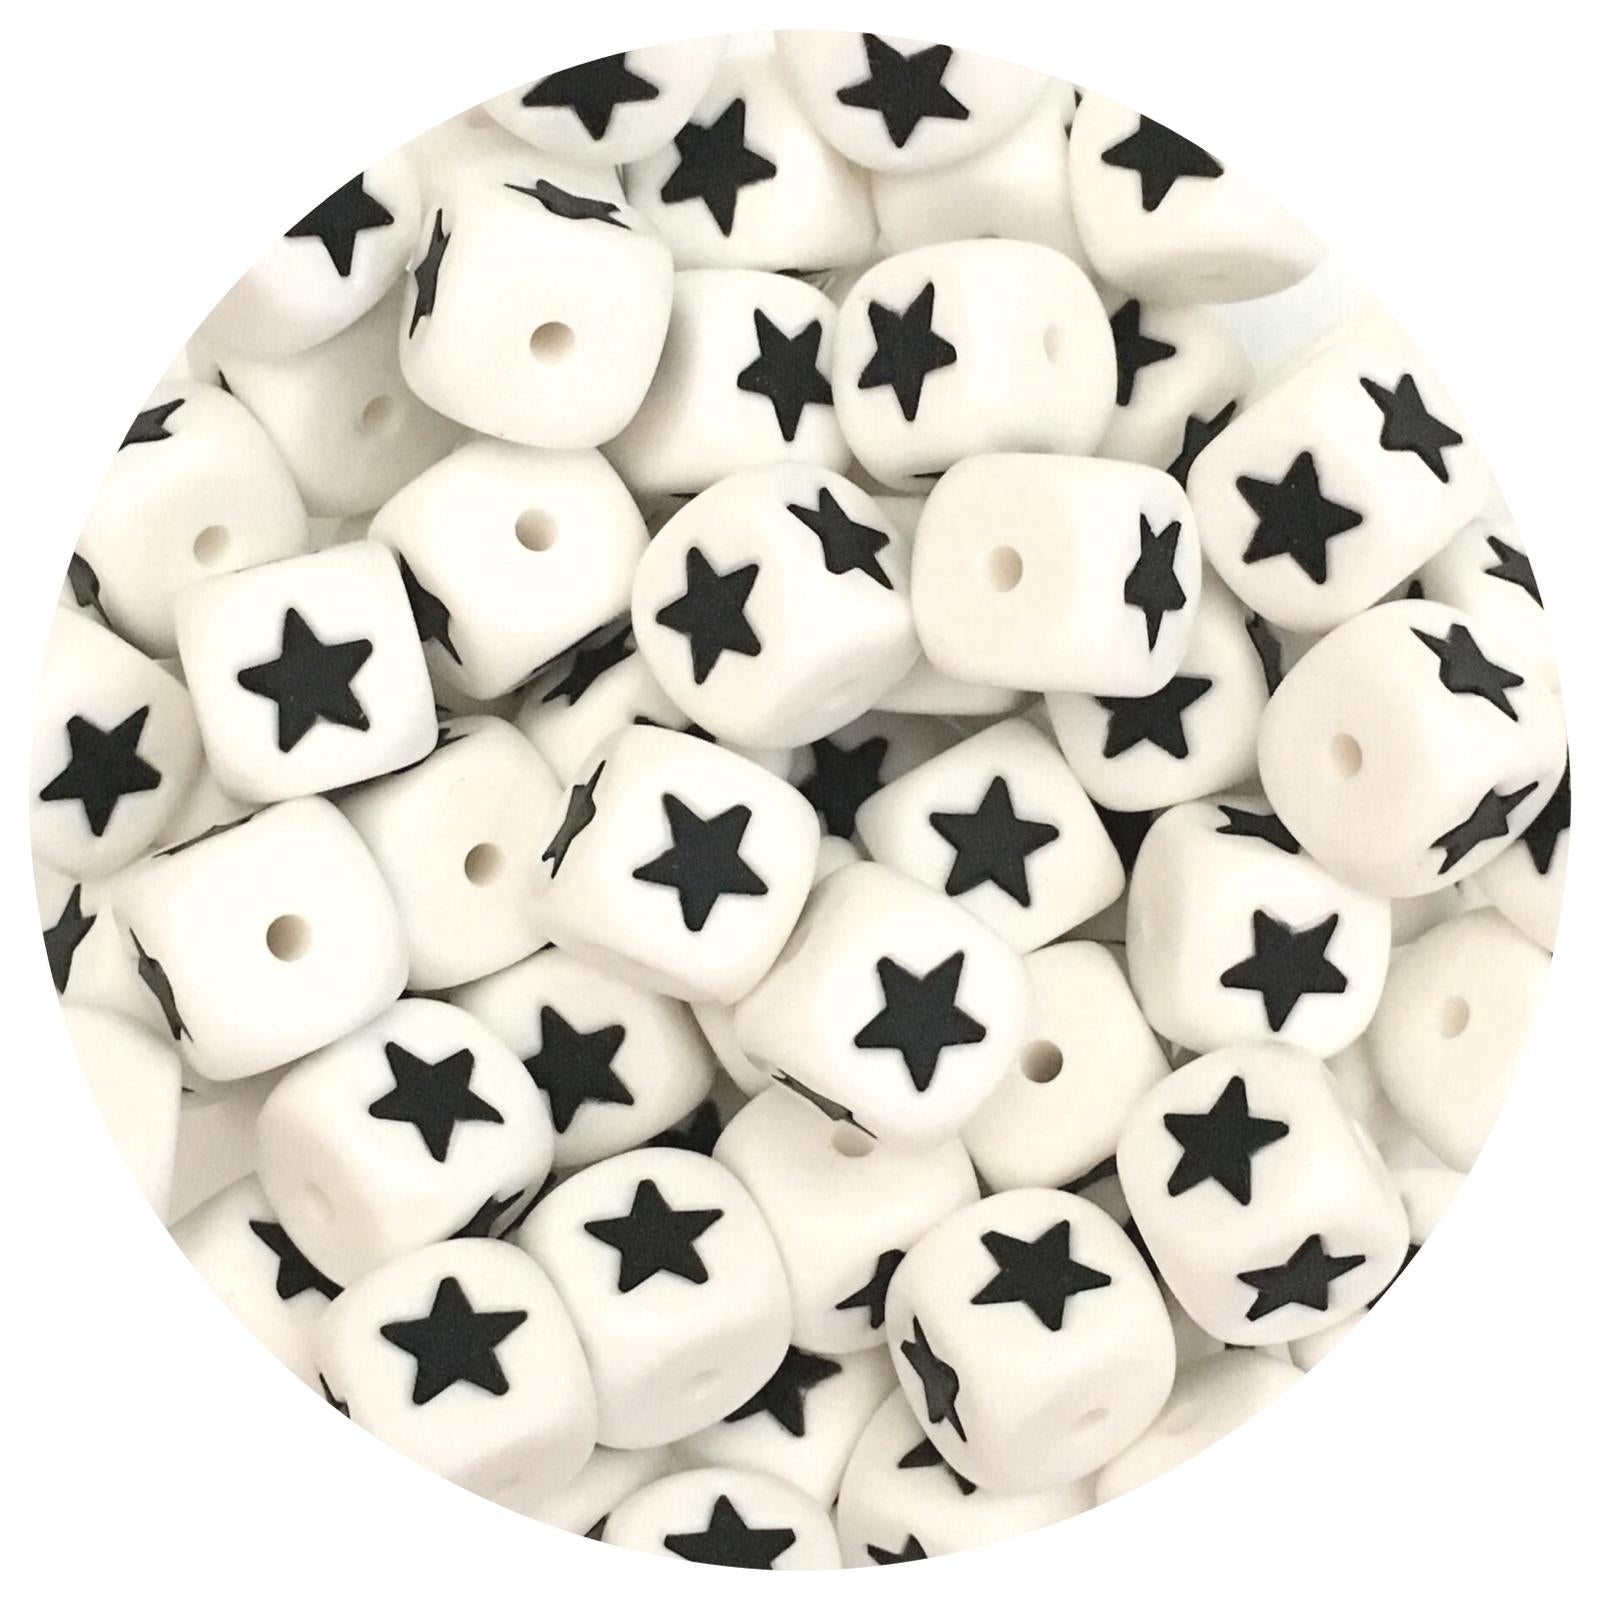 12mm Silicone Star Cube Beads - 5 Beads